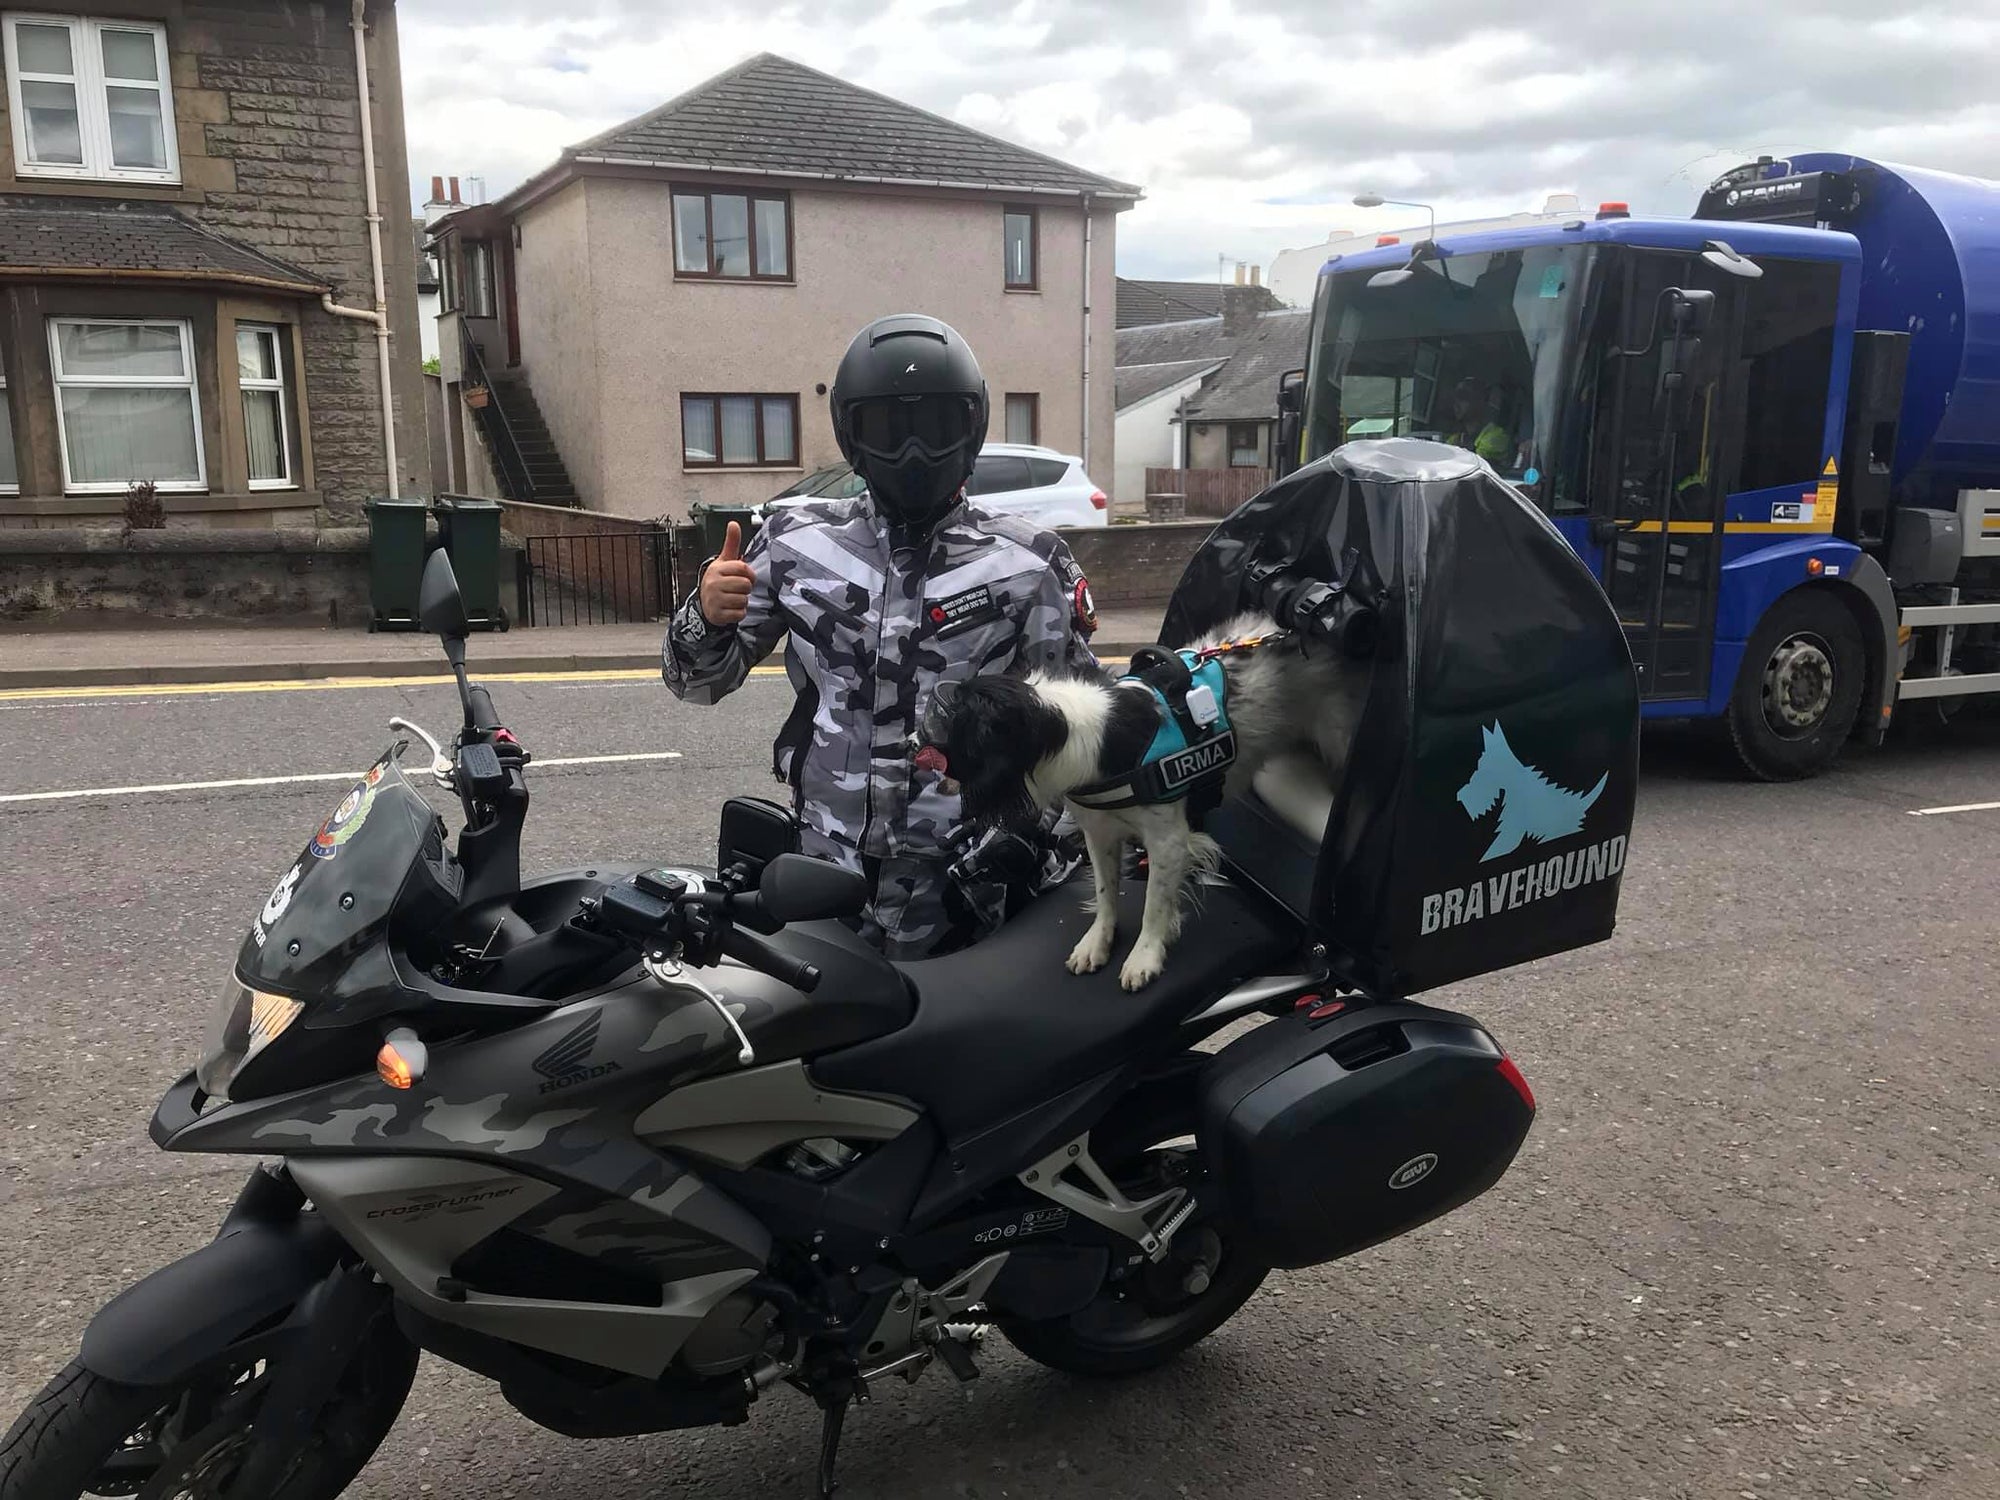 Pillion Pooch Motorcycle Dog Carrier mounted on a Honda Crossrunner. Photo from Paul Wilkie from Scotland with his PTSD service dog Irma wearing Rex Specs.